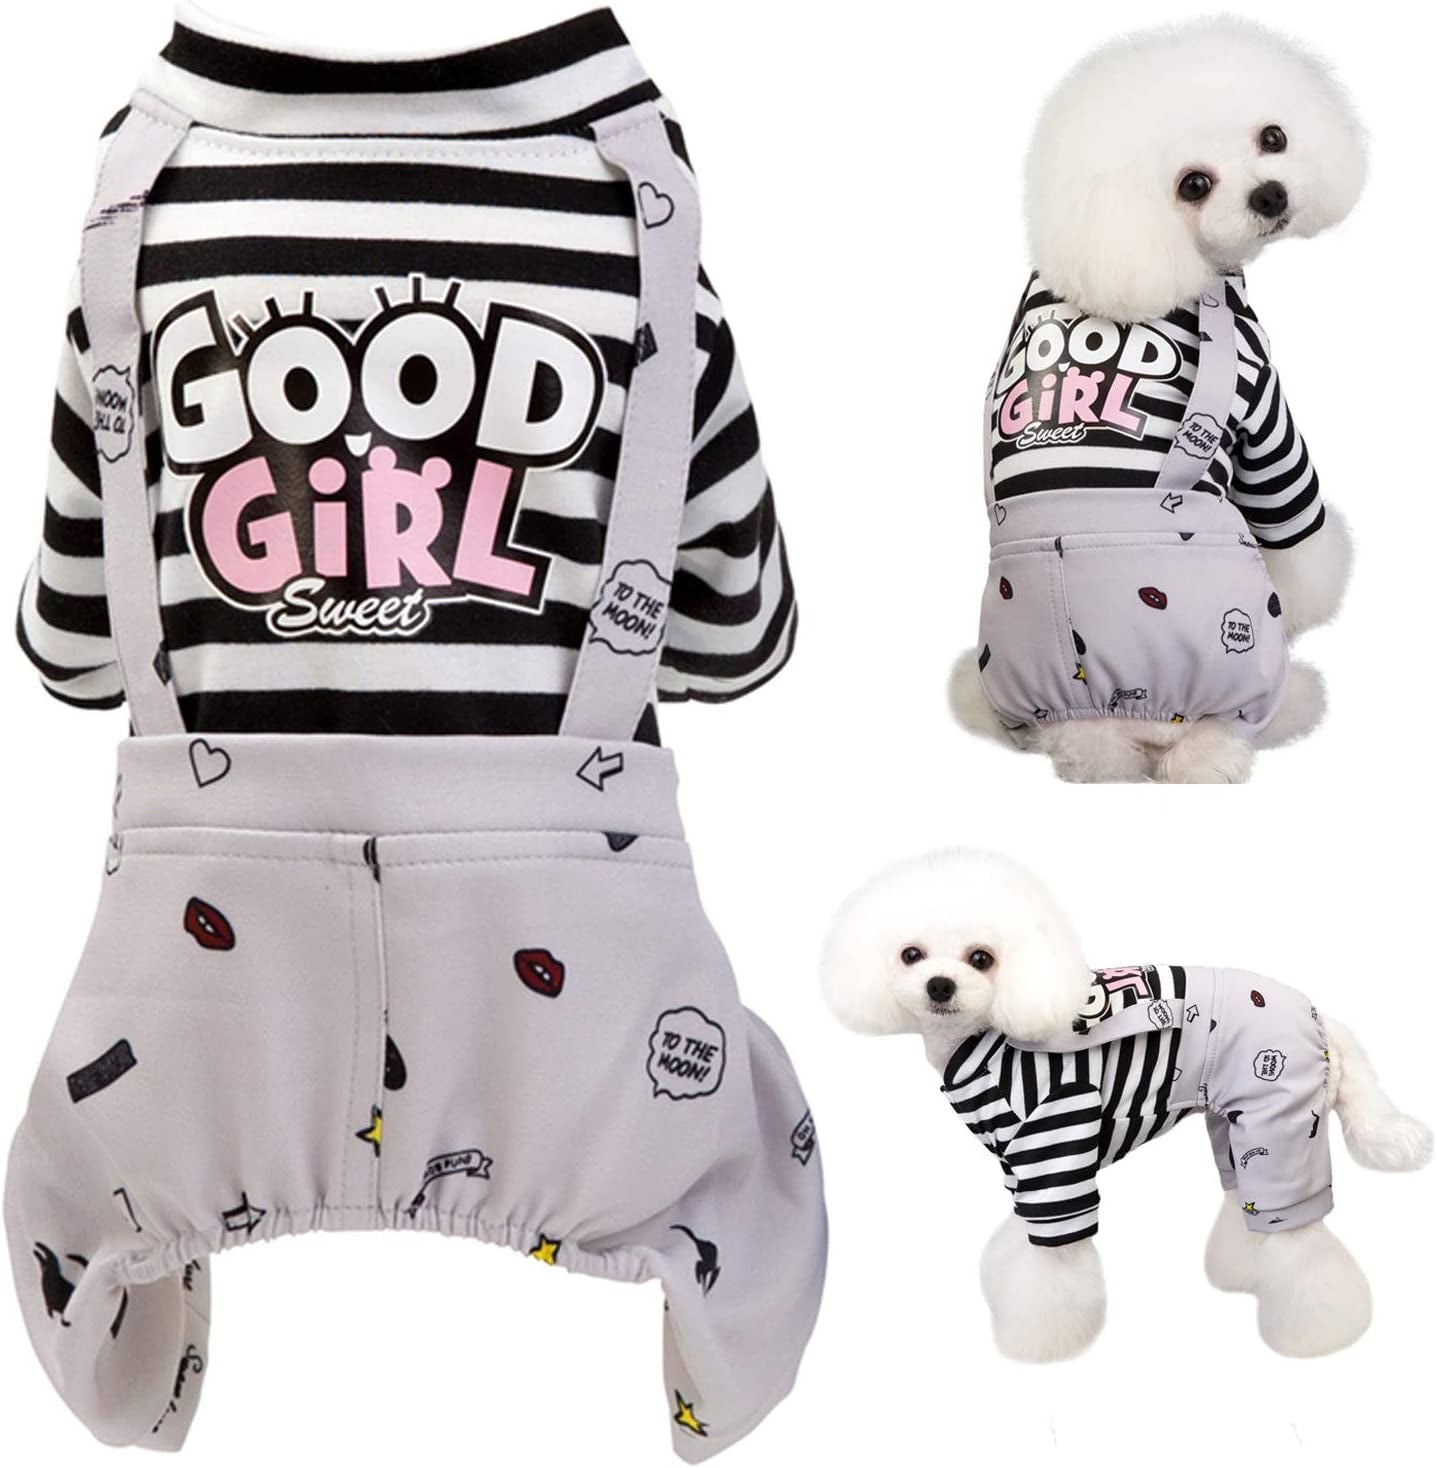 Brocarp Dog Clothes Striped Onesie Puppy Shirt, Cute Dog Pajamas Bodysuit Coat Jumpsuit Overalls Soft Comfort Pjs Apparel Costume, Dog Outfit for Small Medium Large Dogs Cats Kitten Boy Girl Animals & Pet Supplies > Pet Supplies > Dog Supplies > Dog Apparel Brocarp Grey Small 